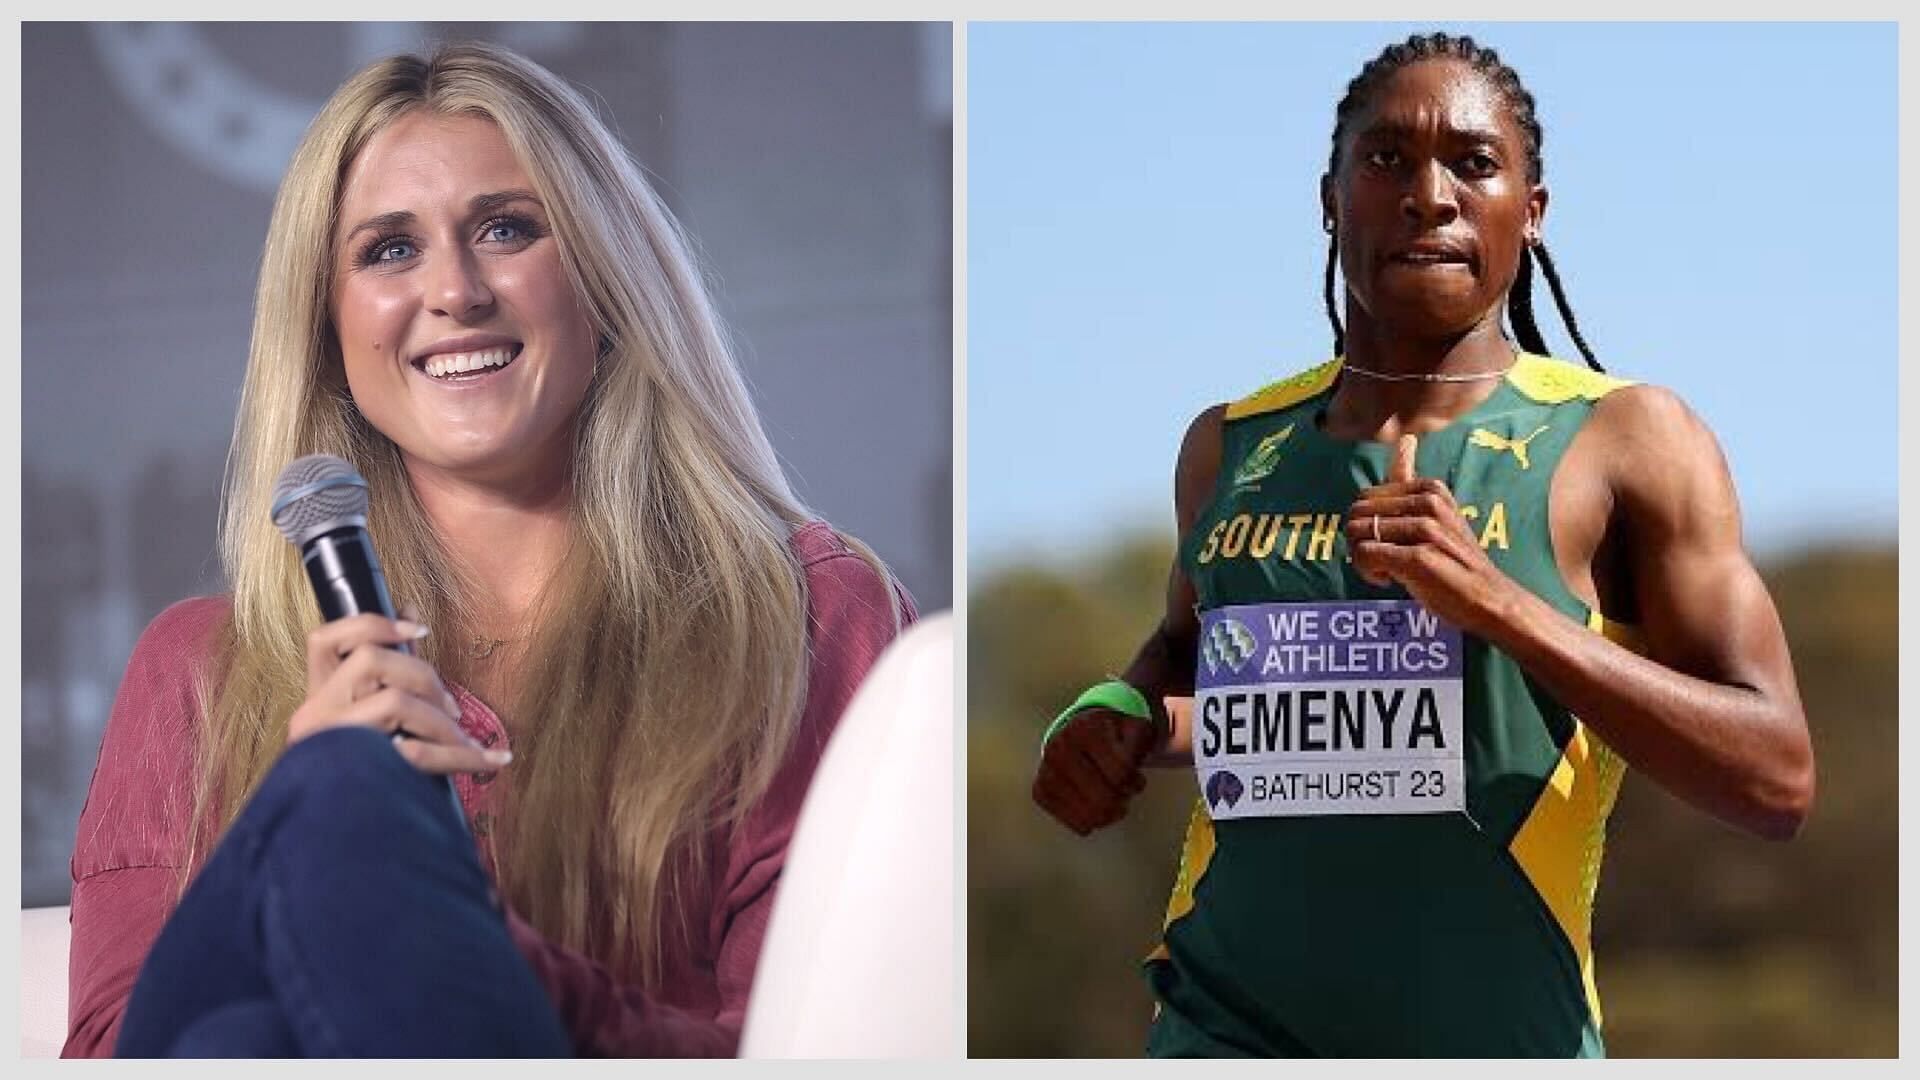 Riley Gaines calls Caster Semenya  a male with normal testosterone levels